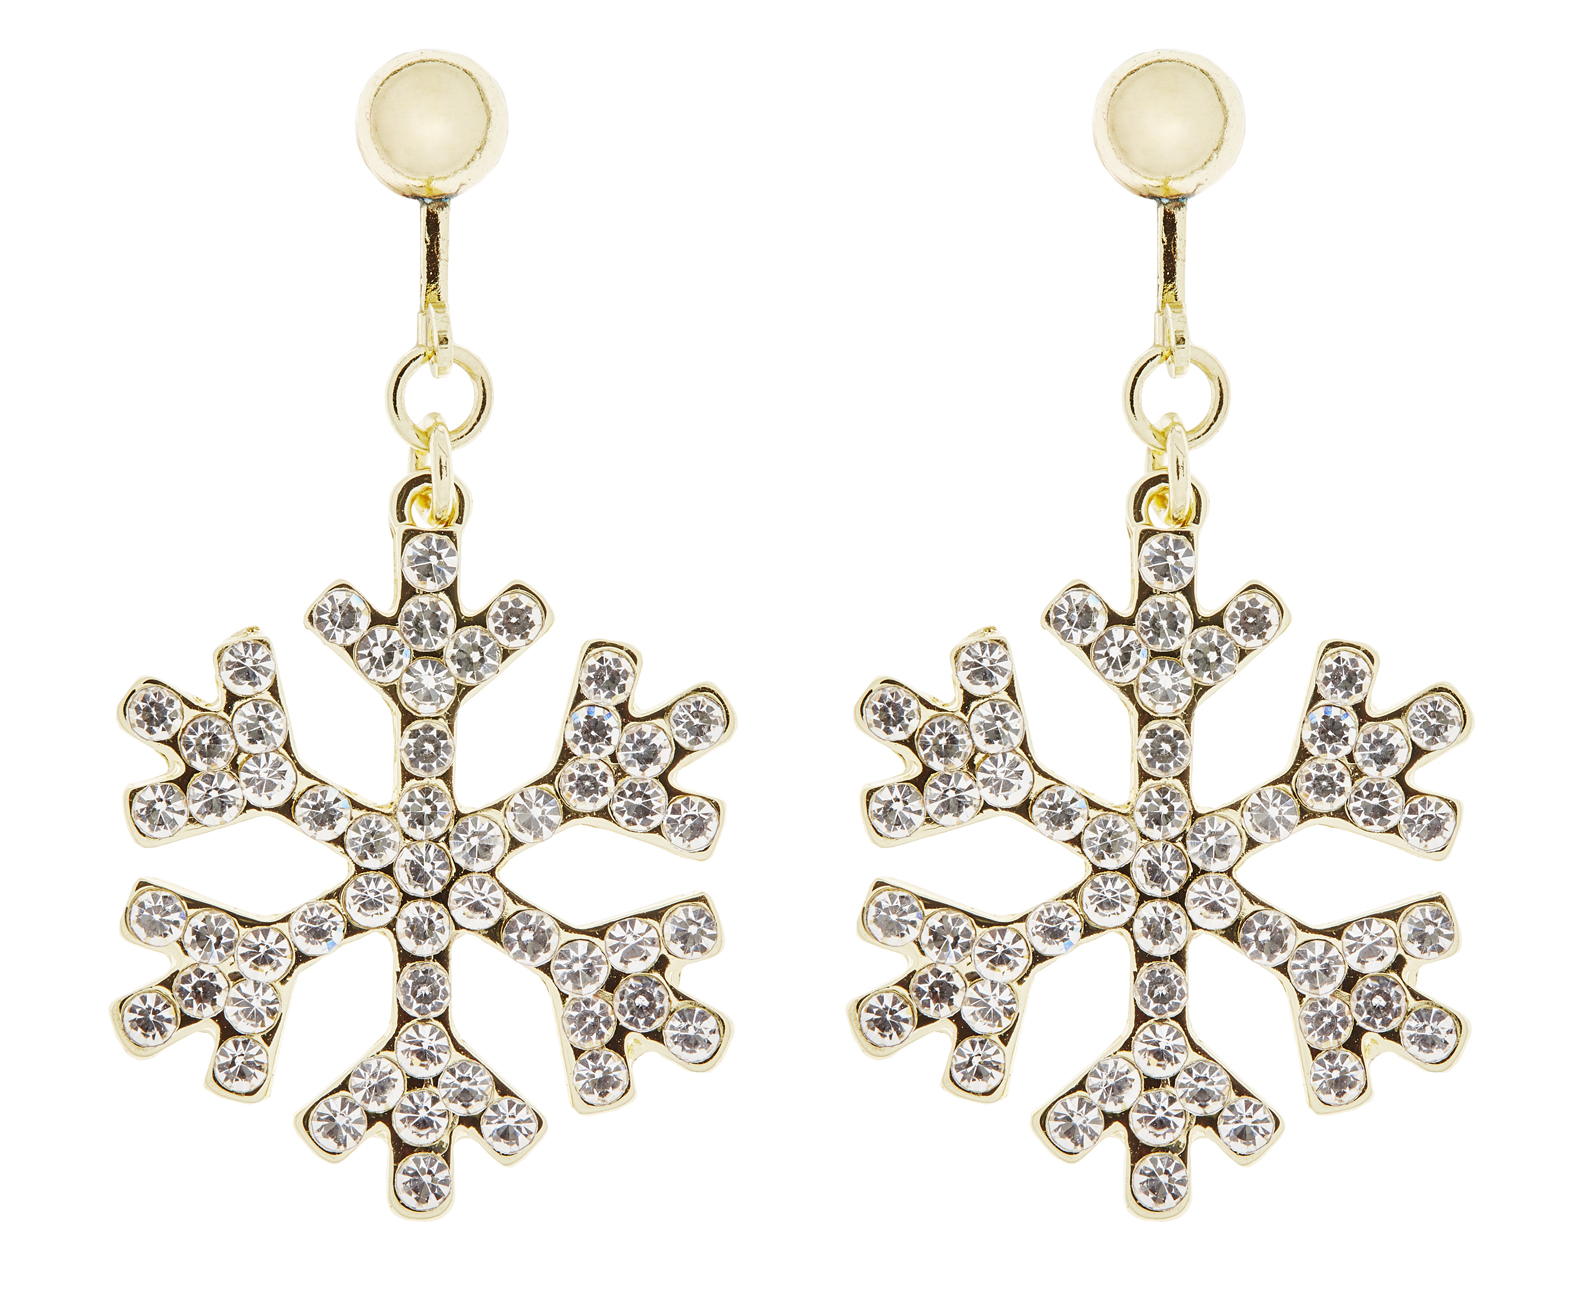 Clip On Earrings - Millie G - gold snowflake earring with clear crystals